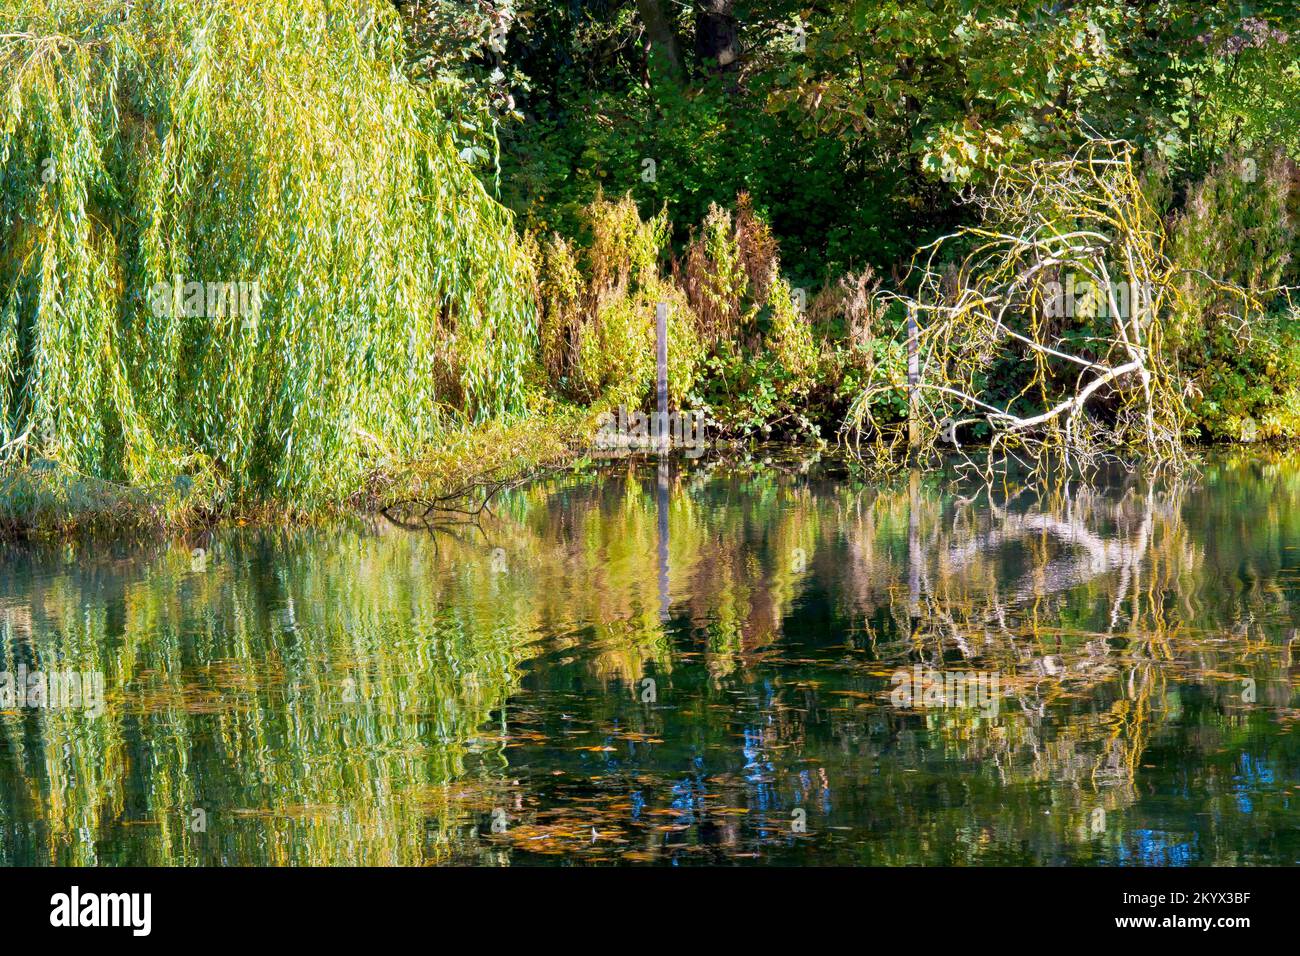 The drooping branches of a Weeping Willow (salix babylonica) and a dead tree reflected in the calm waters of Keptie Pond in Arbroath, Angus, Scotland. Stock Photo